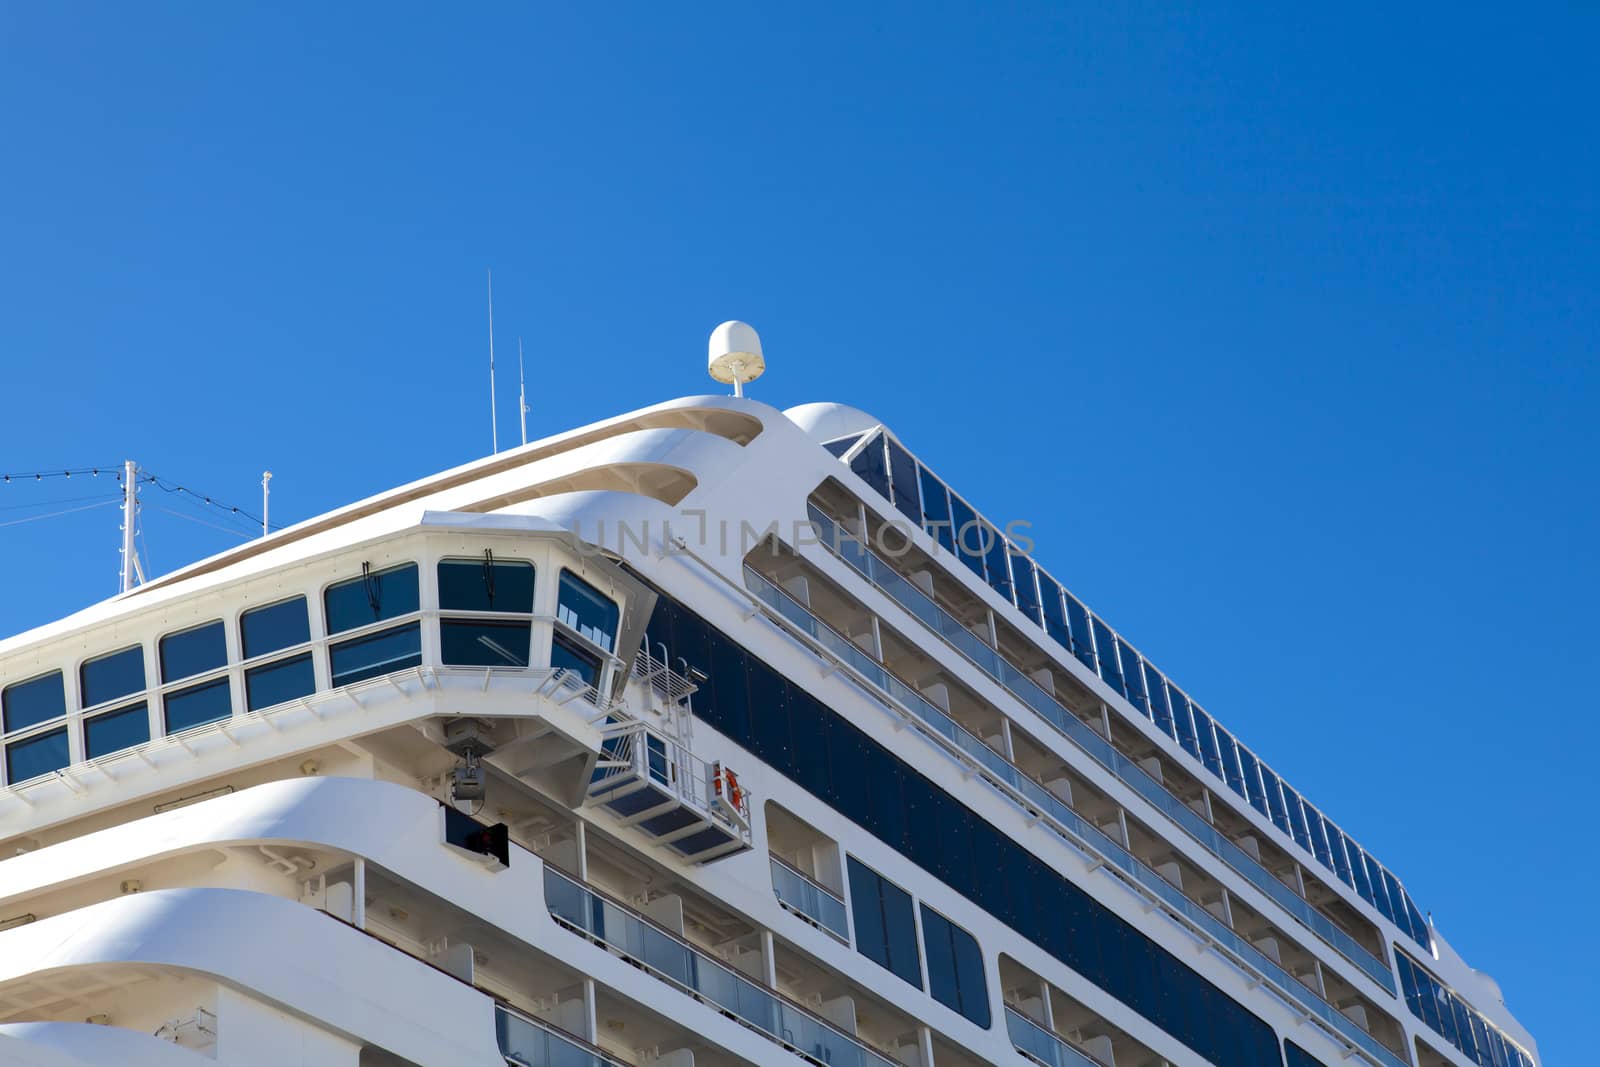 Side angle view on large cruise liner ship